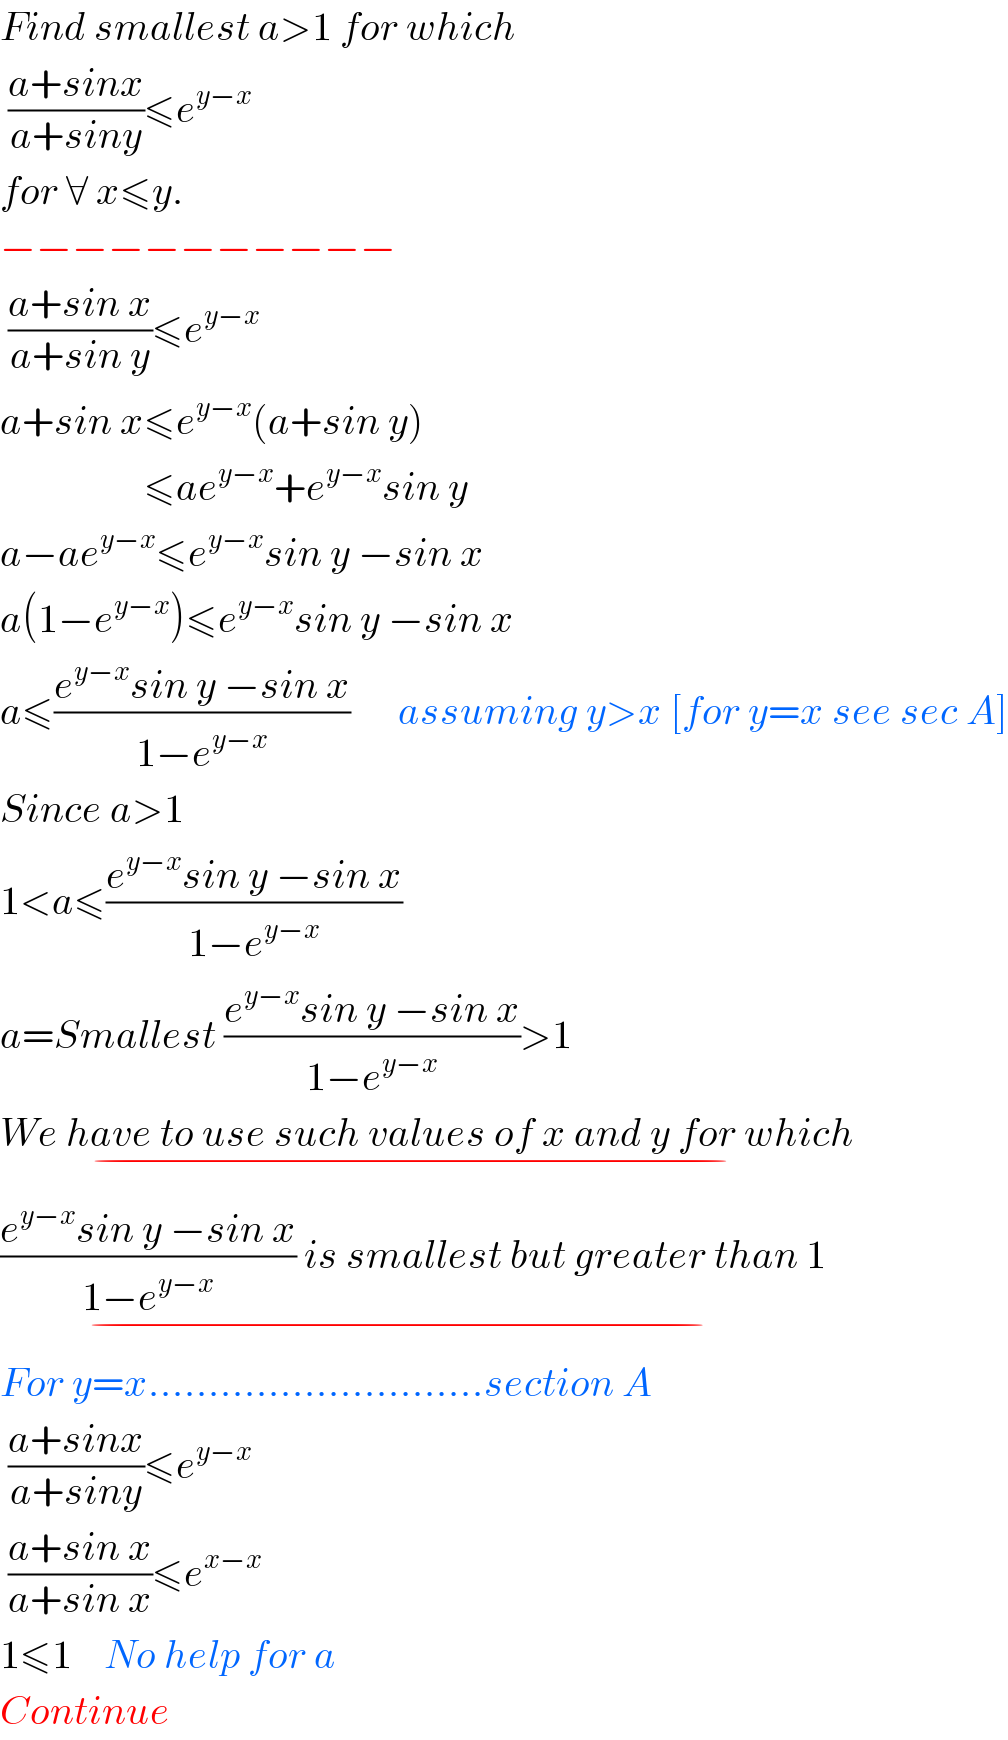 Find smallest a>1 for which   ((a+sinx)/(a+siny))≤e^(y−x)   for ∀ x≤y.  −−−−−−−−−−−   ((a+sin x)/(a+sin y))≤e^(y−x)   a+sin x≤e^(y−x) (a+sin y)                    ≤ae^(y−x) +e^(y−x) sin y  a−ae^(y−x) ≤e^(y−x) sin y −sin x  a(1−e^(y−x) )≤e^(y−x) sin y −sin x  a≤((e^(y−x) sin y −sin x)/(1−e^(y−x) ))      assuming y>x [for y=x see sec A]  Since a>1  1<a≤((e^(y−x) sin y −sin x)/(1−e^(y−x) ))  a=Smallest ((e^(y−x) sin y −sin x)/(1−e^(y−x) ))>1  We have to use such values of x and y for which_(−)   ((e^(y−x) sin y −sin x)/(1−e^(y−x) )) is smallest but greater than 1_(−)   For y=x............................section A   ((a+sinx)/(a+siny))≤e^(y−x)    ((a+sin x)/(a+sin x))≤e^(x−x)   1≤1    No help for a  Continue  